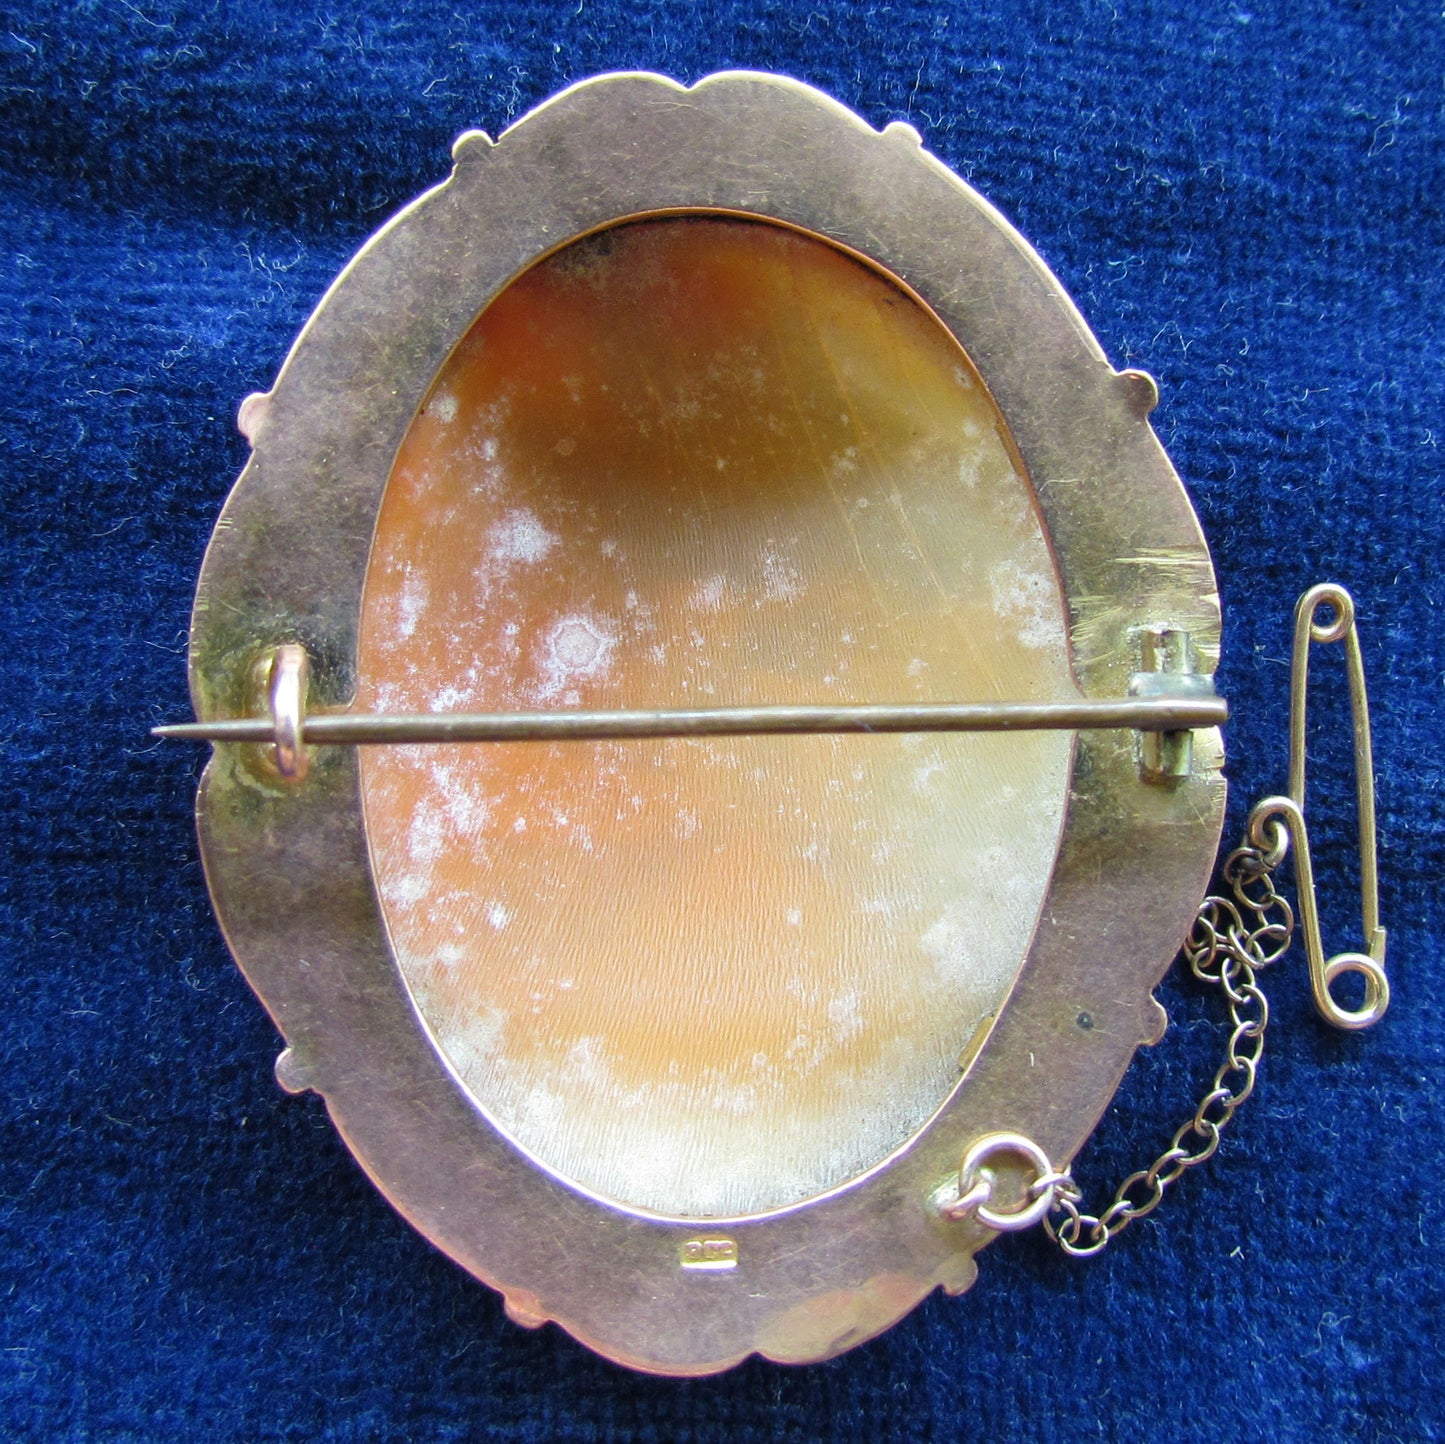 9ct Gold Cameo Brooch With Safety Chain